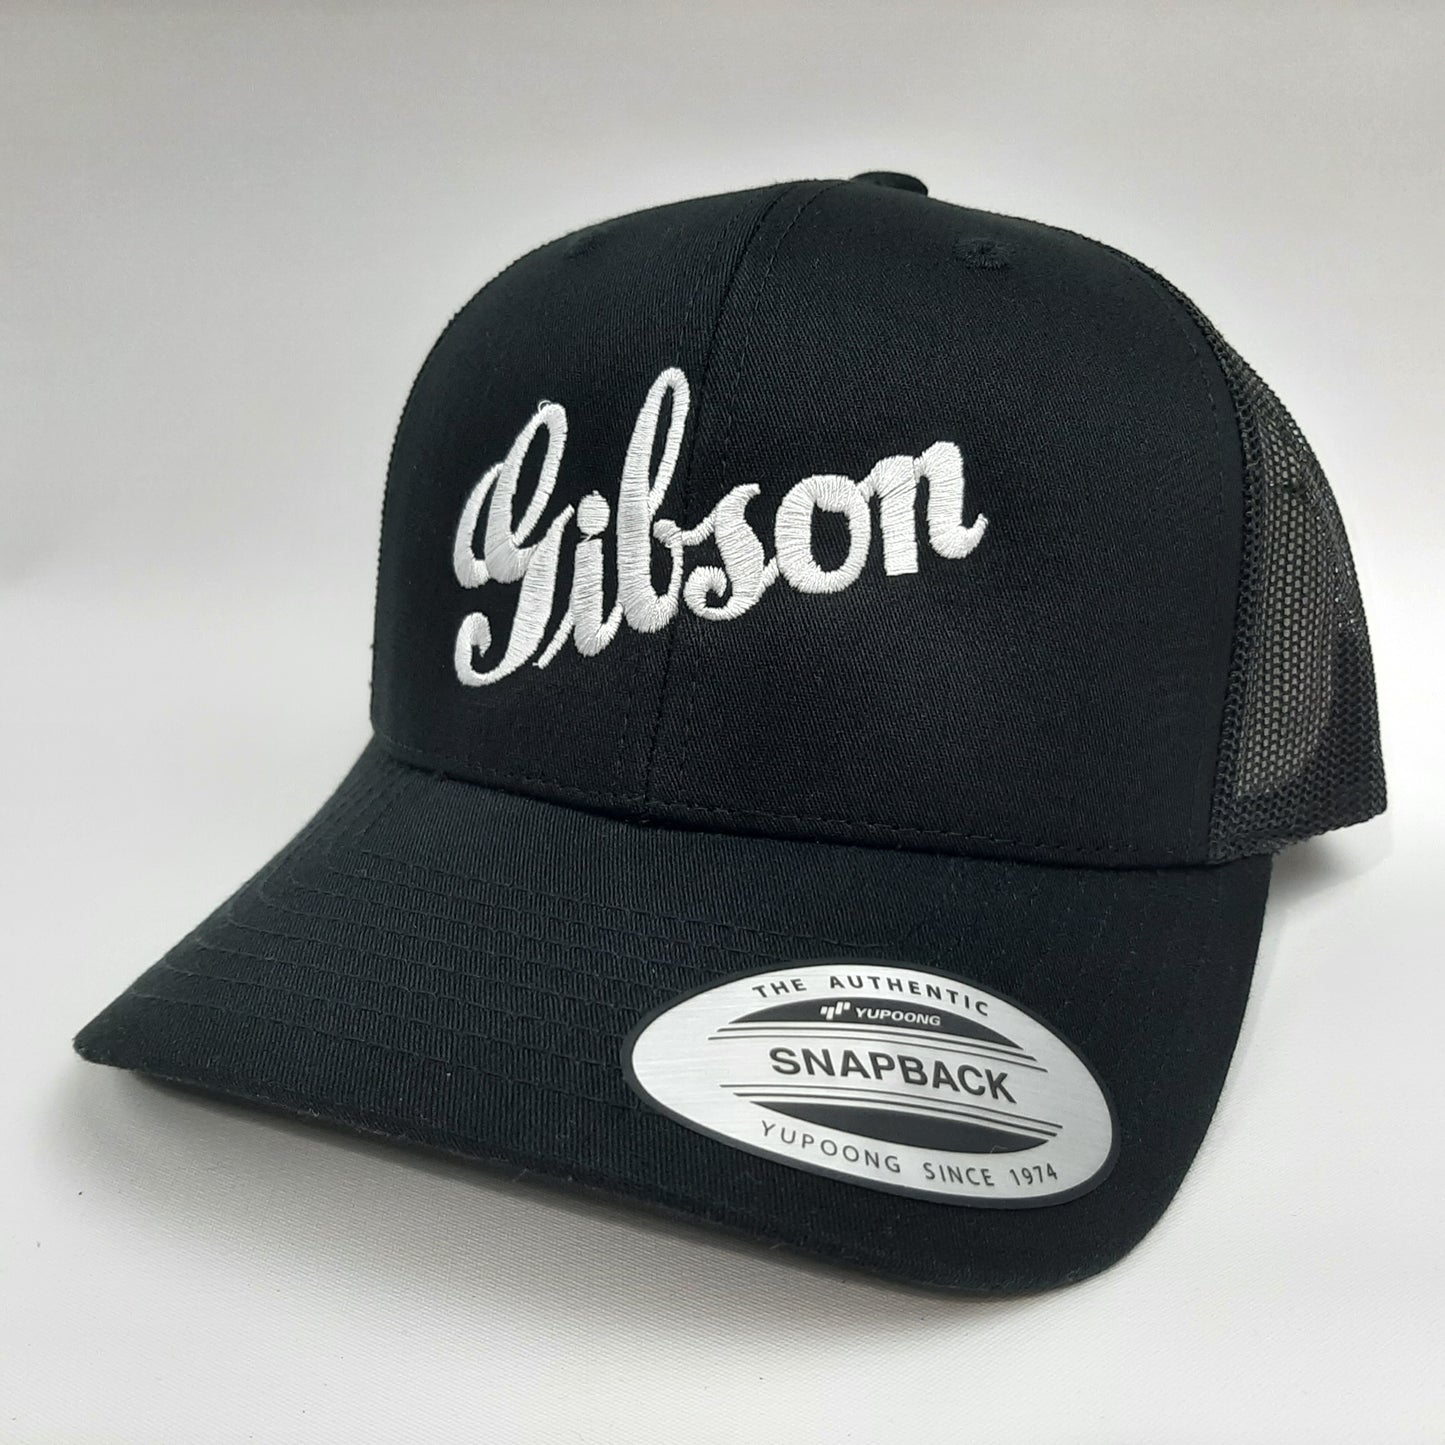 Gibson curved bill embroidered mesh snapback cap hat black